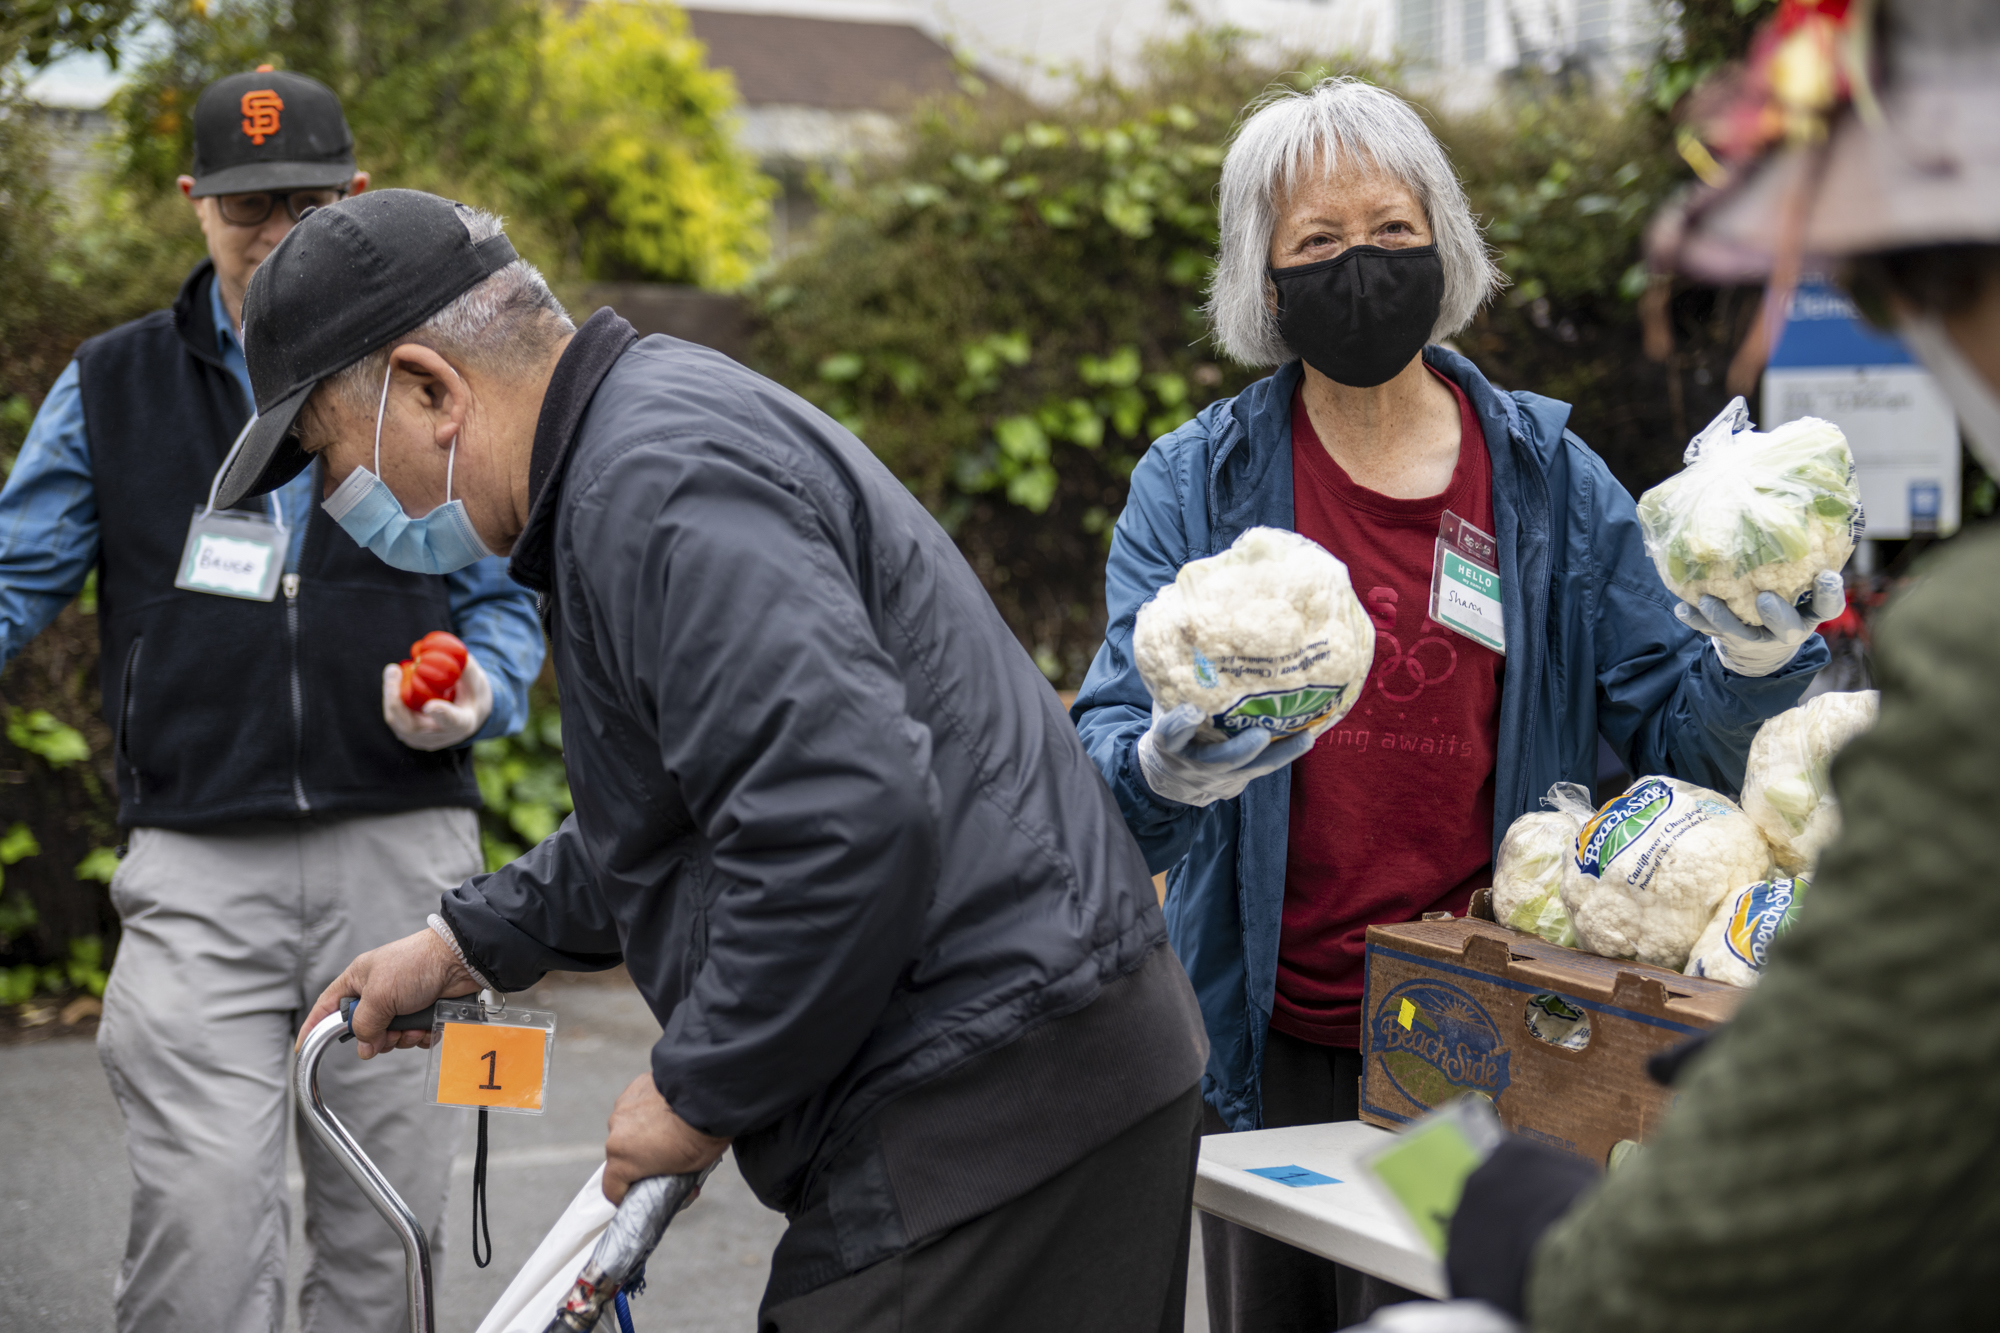 A woman with gray hair wearing a black face mask holds out cauliflower heads as a man using a can walks past in a paved outdoor area.